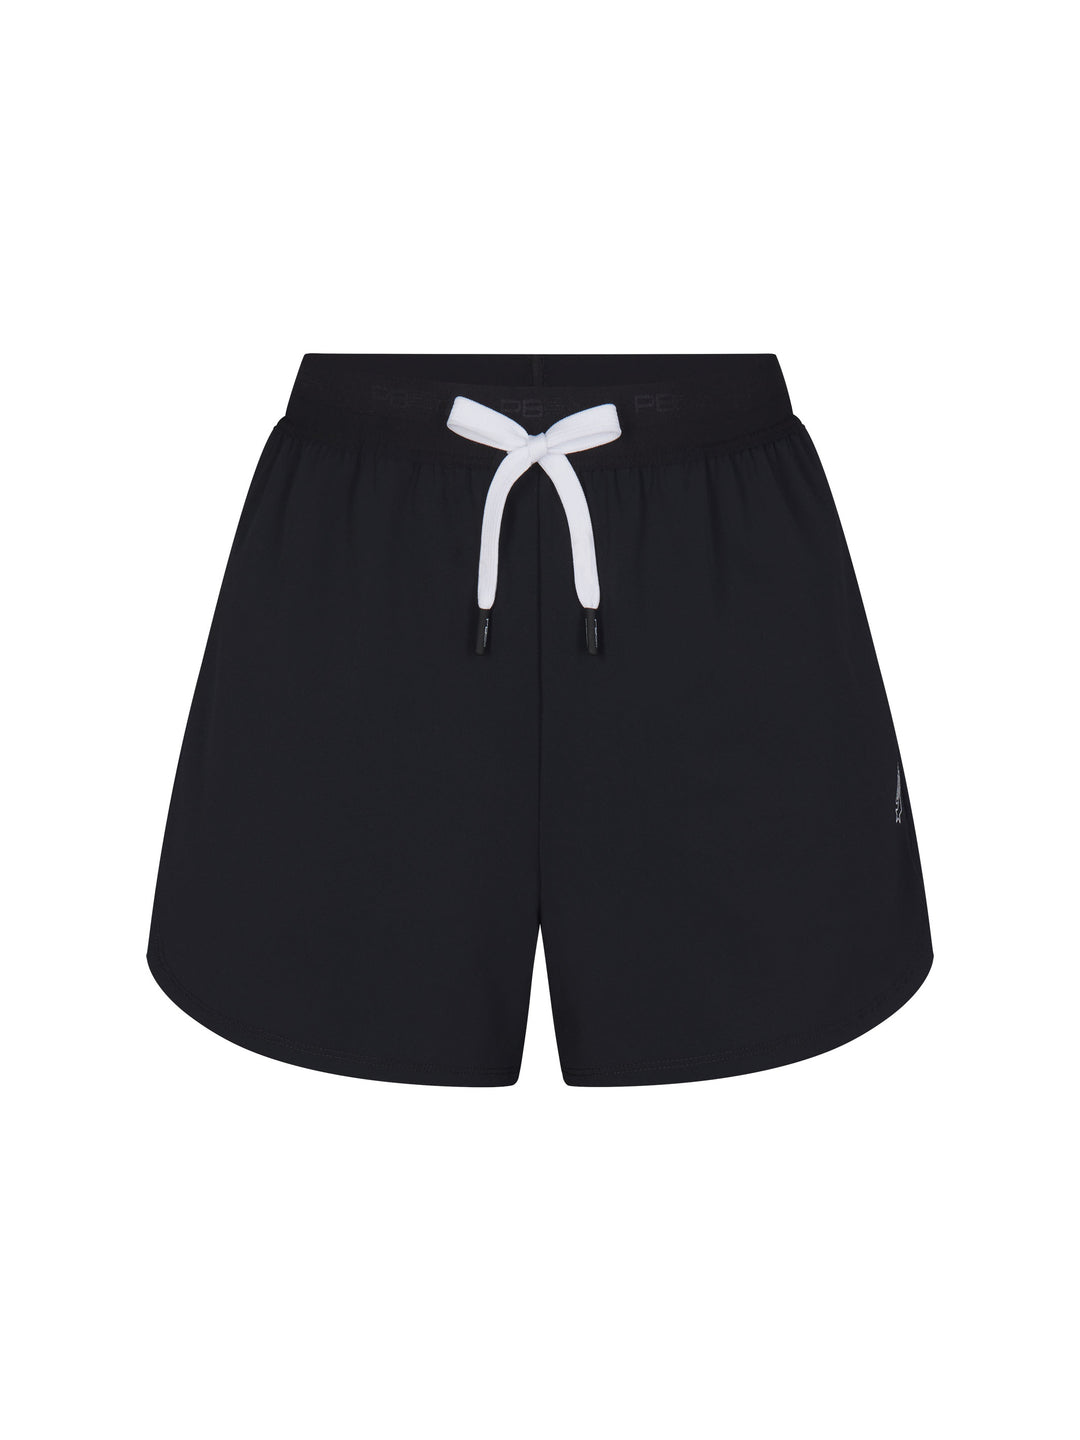 Women's Signature Court Short in black with white drawstring.